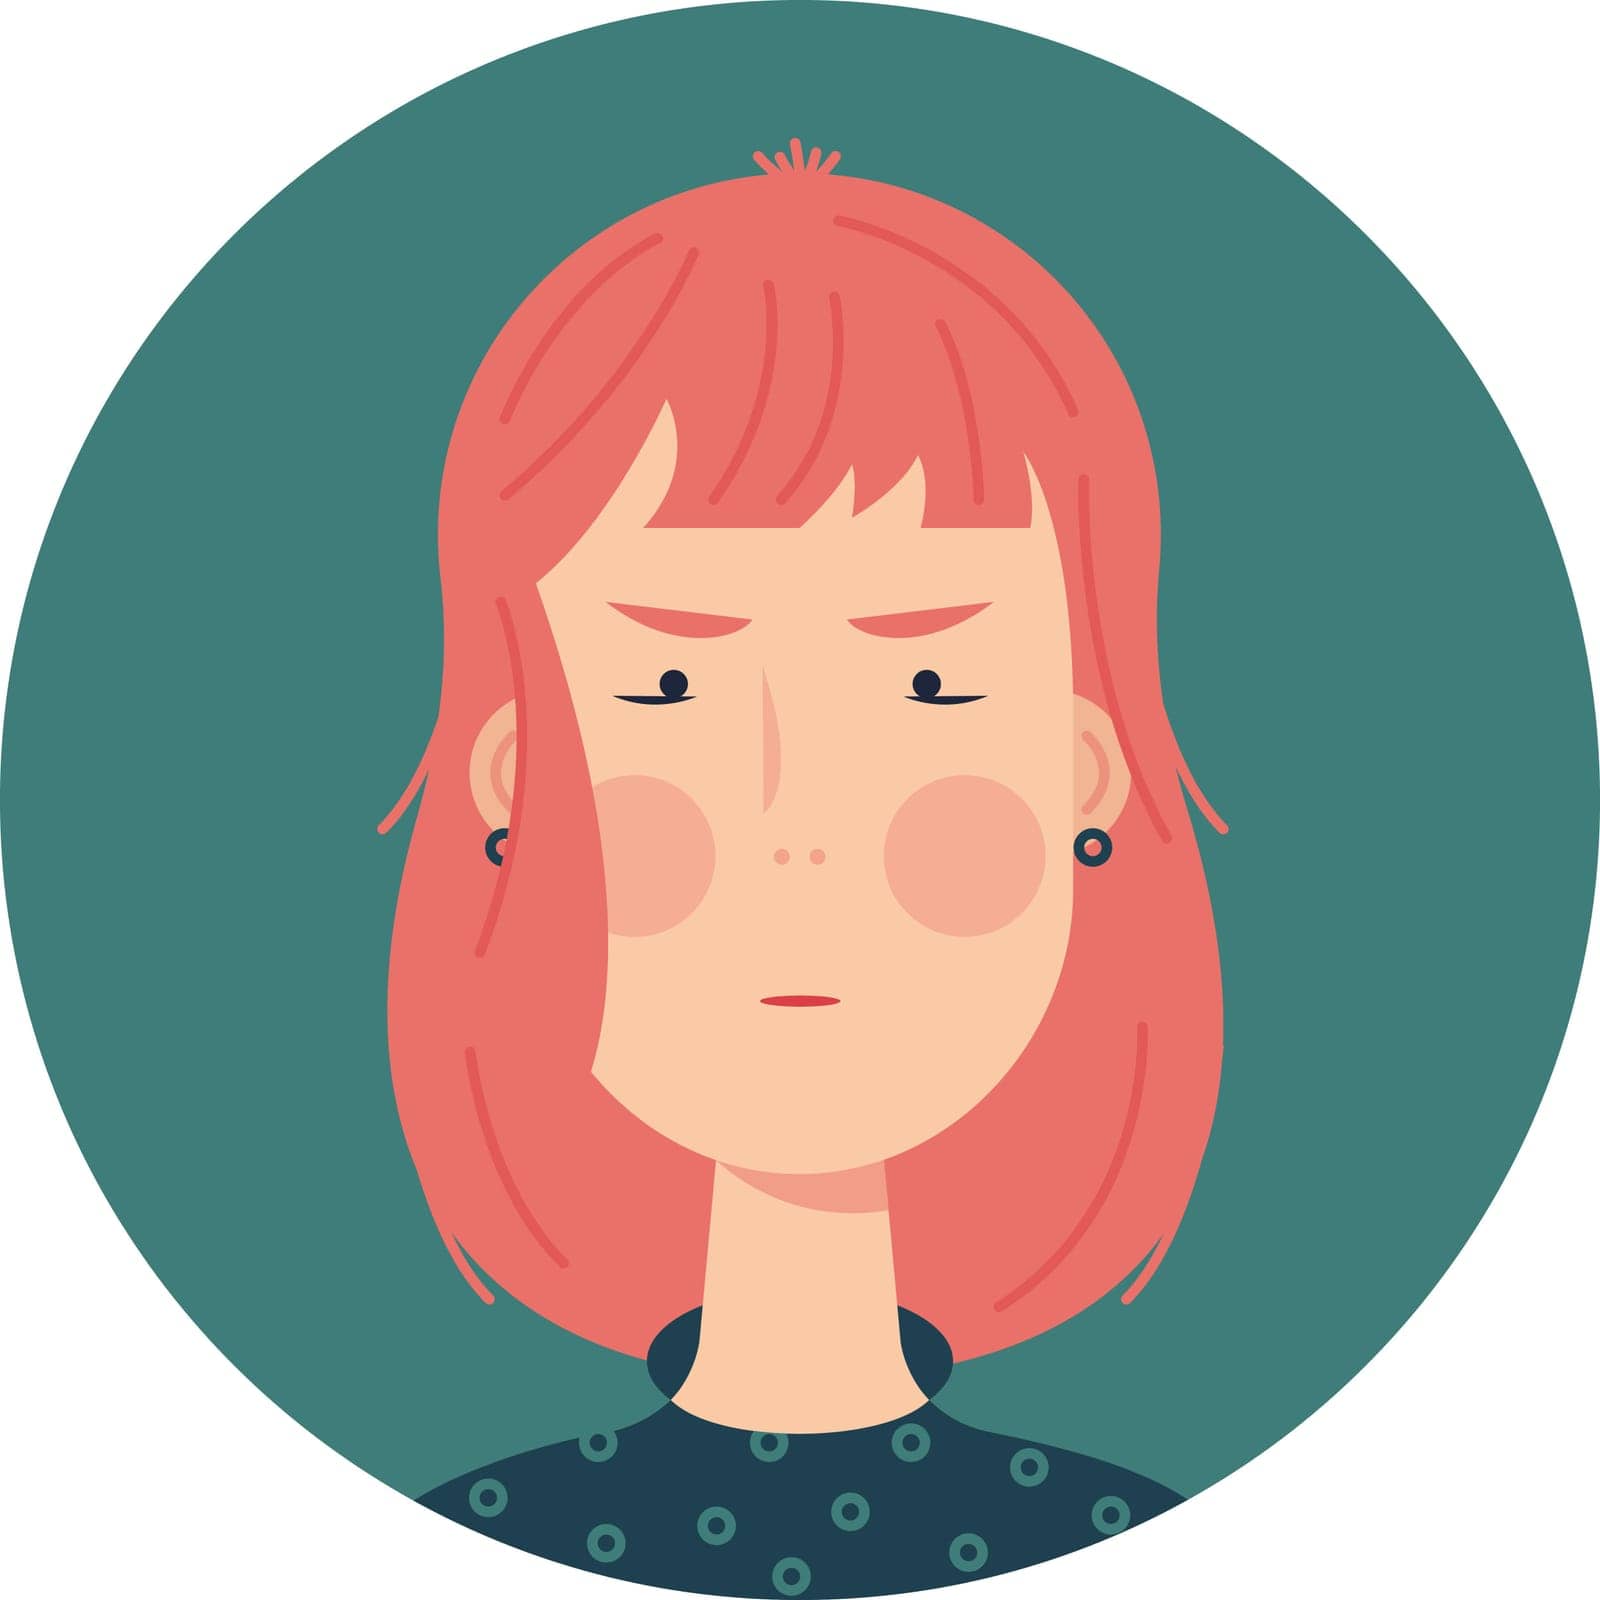 Avatar for one determined red-haired girl.